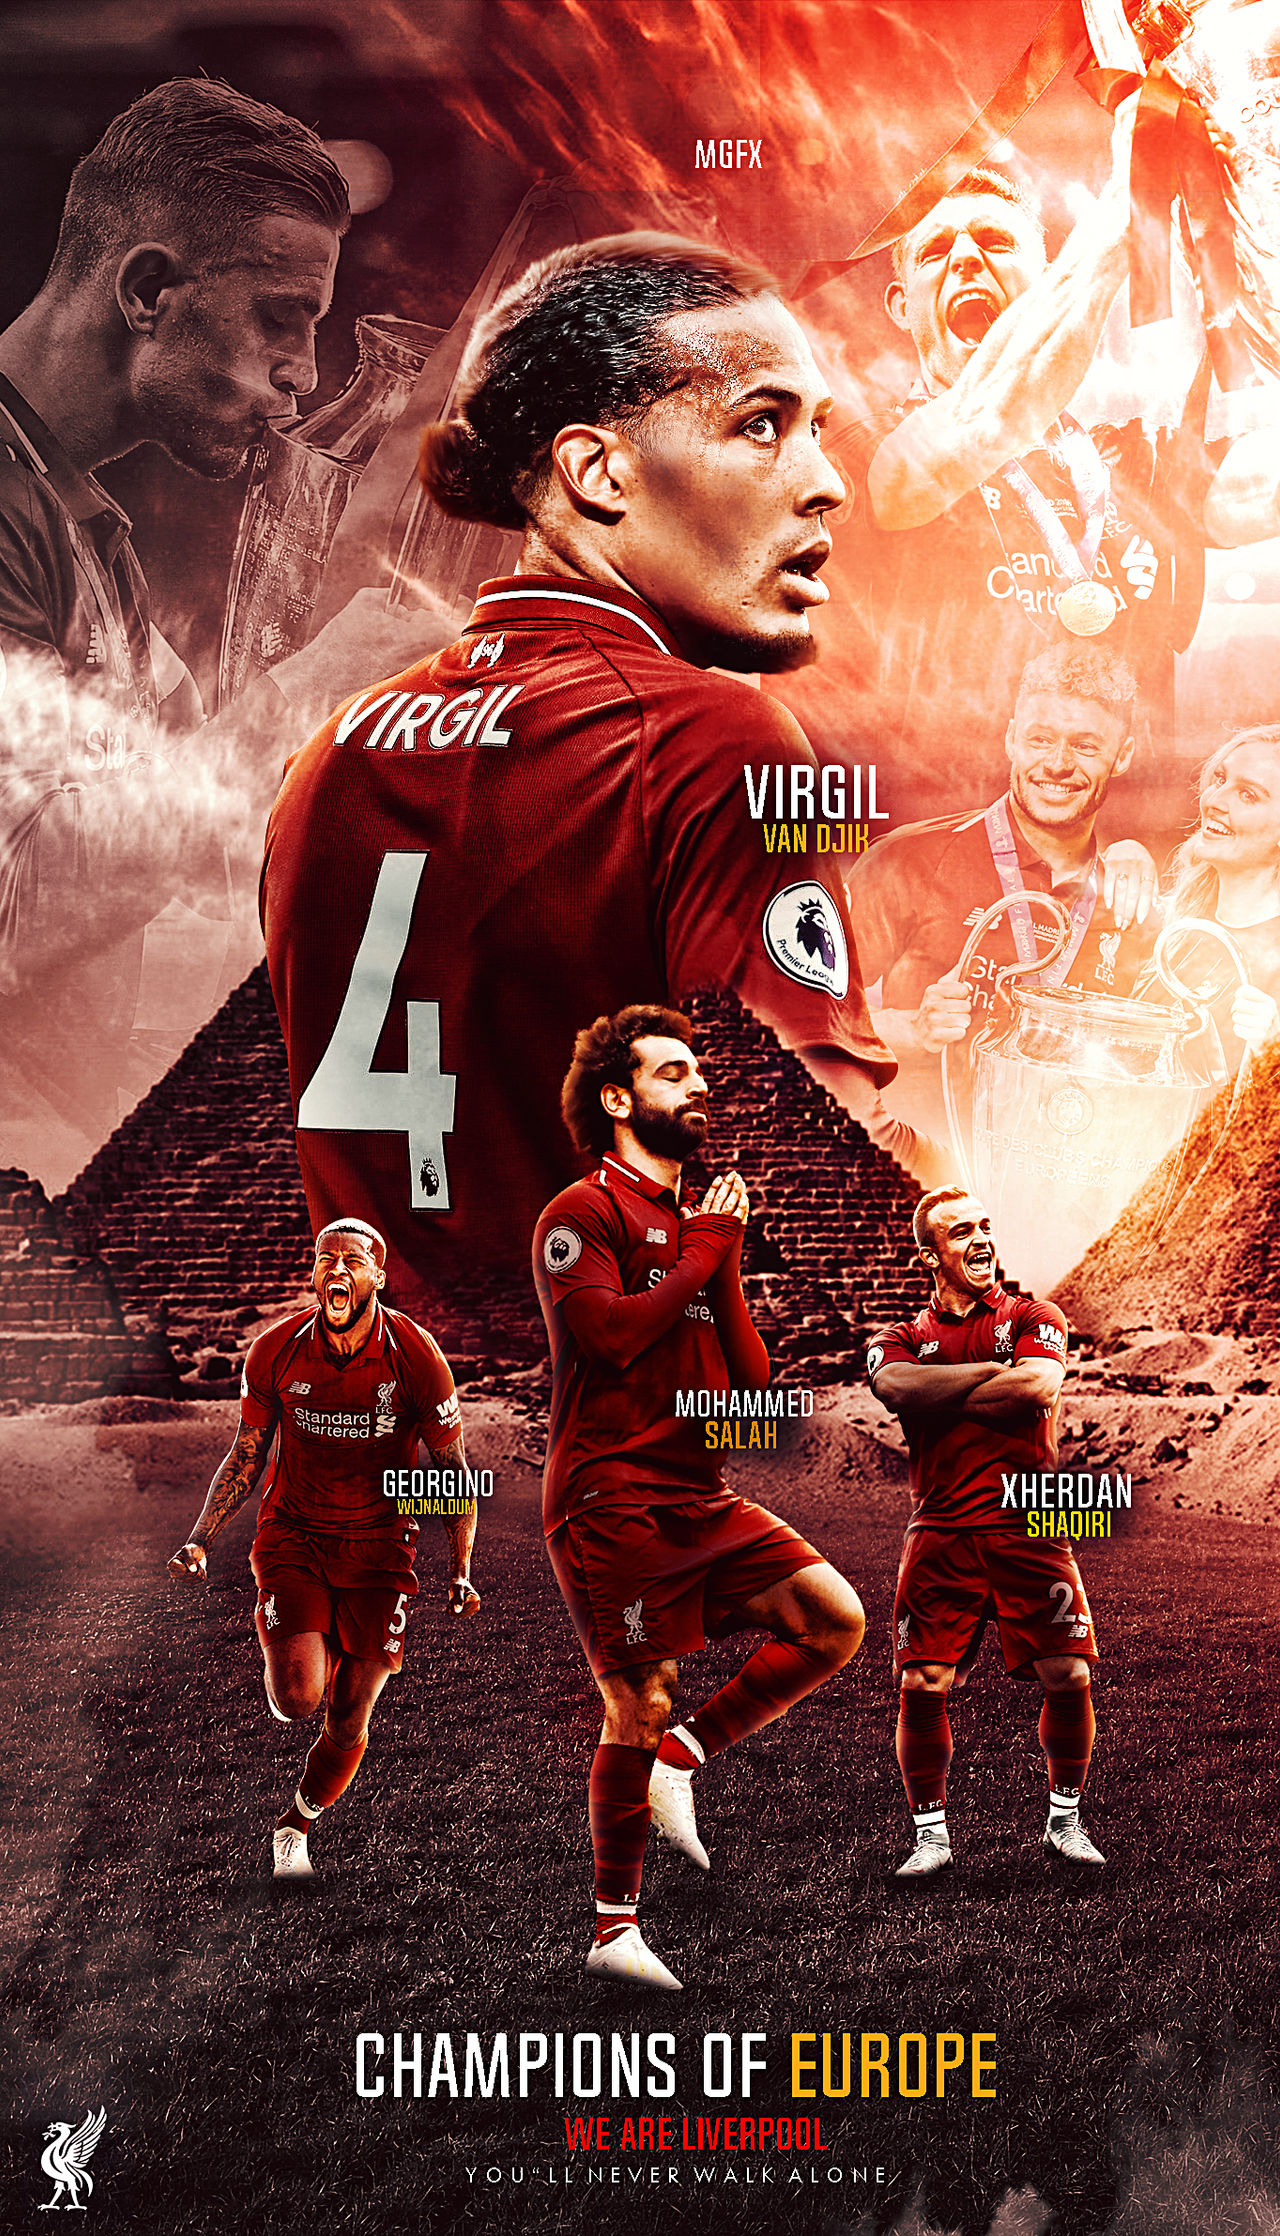  LIVERPOOL  CHAMPIONS  OF EUROPE WALLPAPER  2021 by 